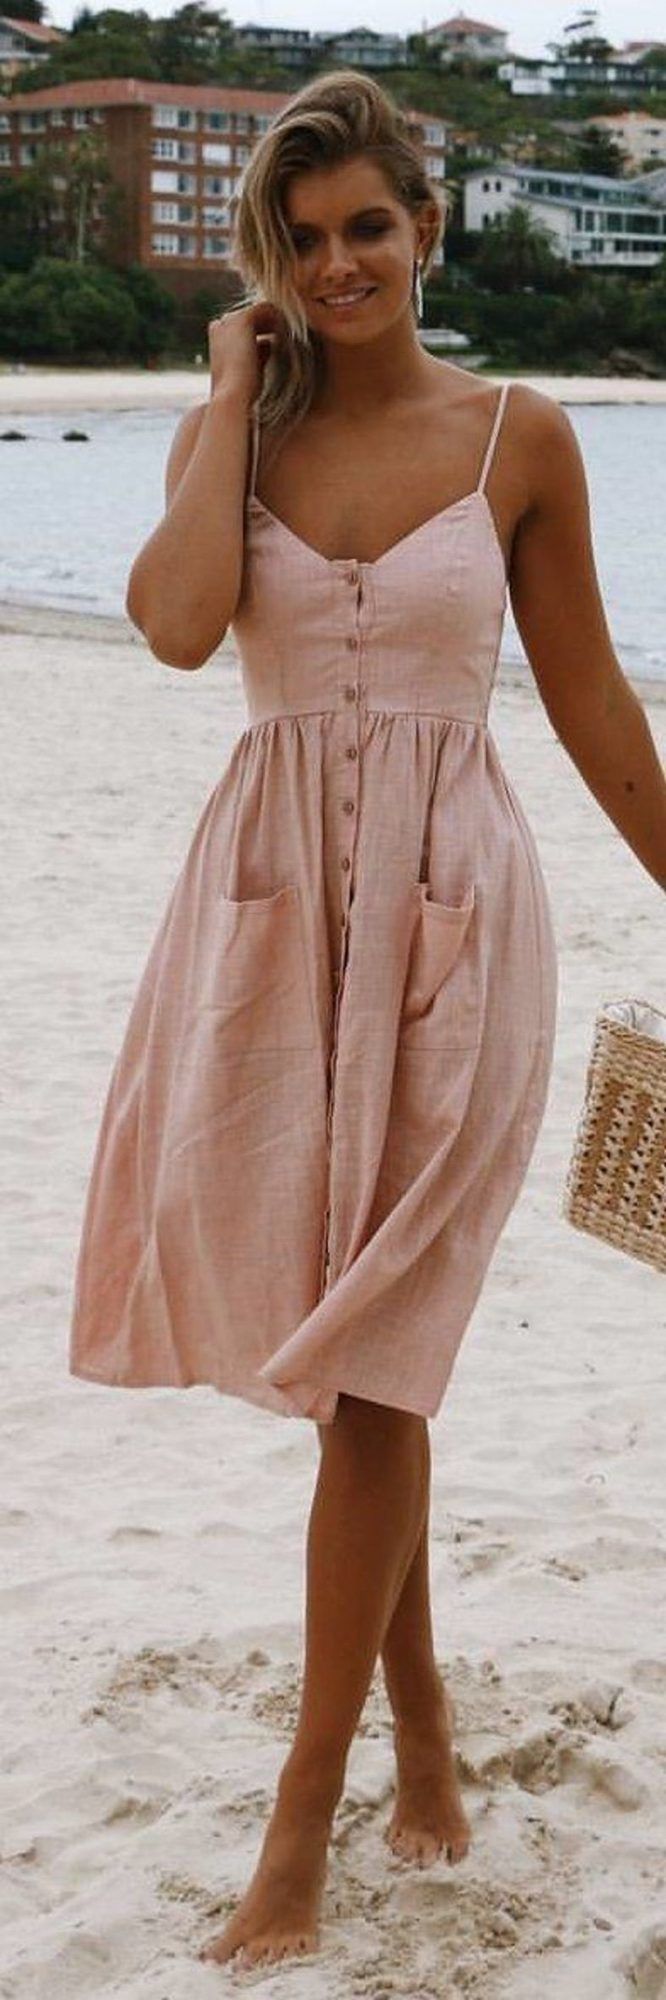 38 Cute Summer Dresses Ideas Summer Outfit Inspiration Page 2 Eazy Glam